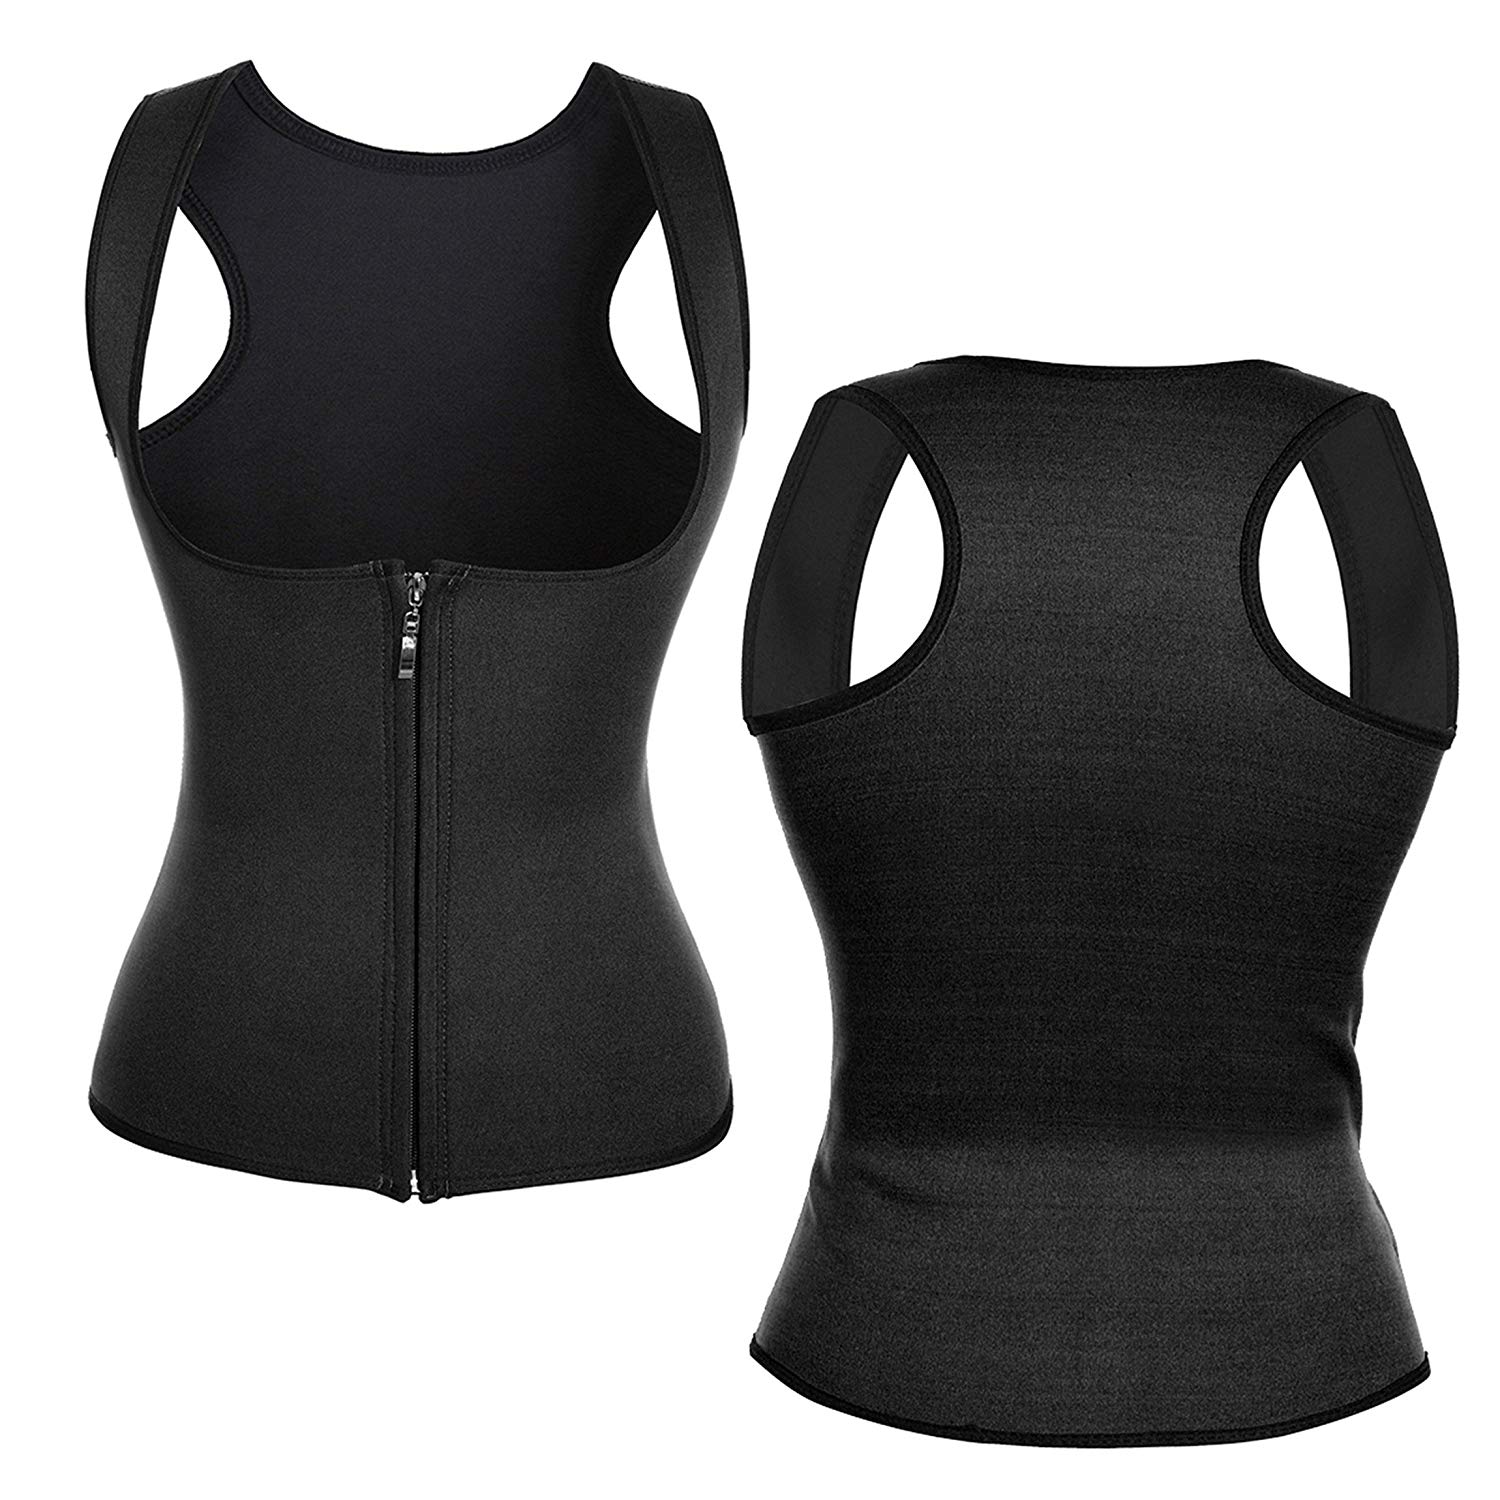 CtriLady Corset for burning fat in the abdomen - buy online from Japan